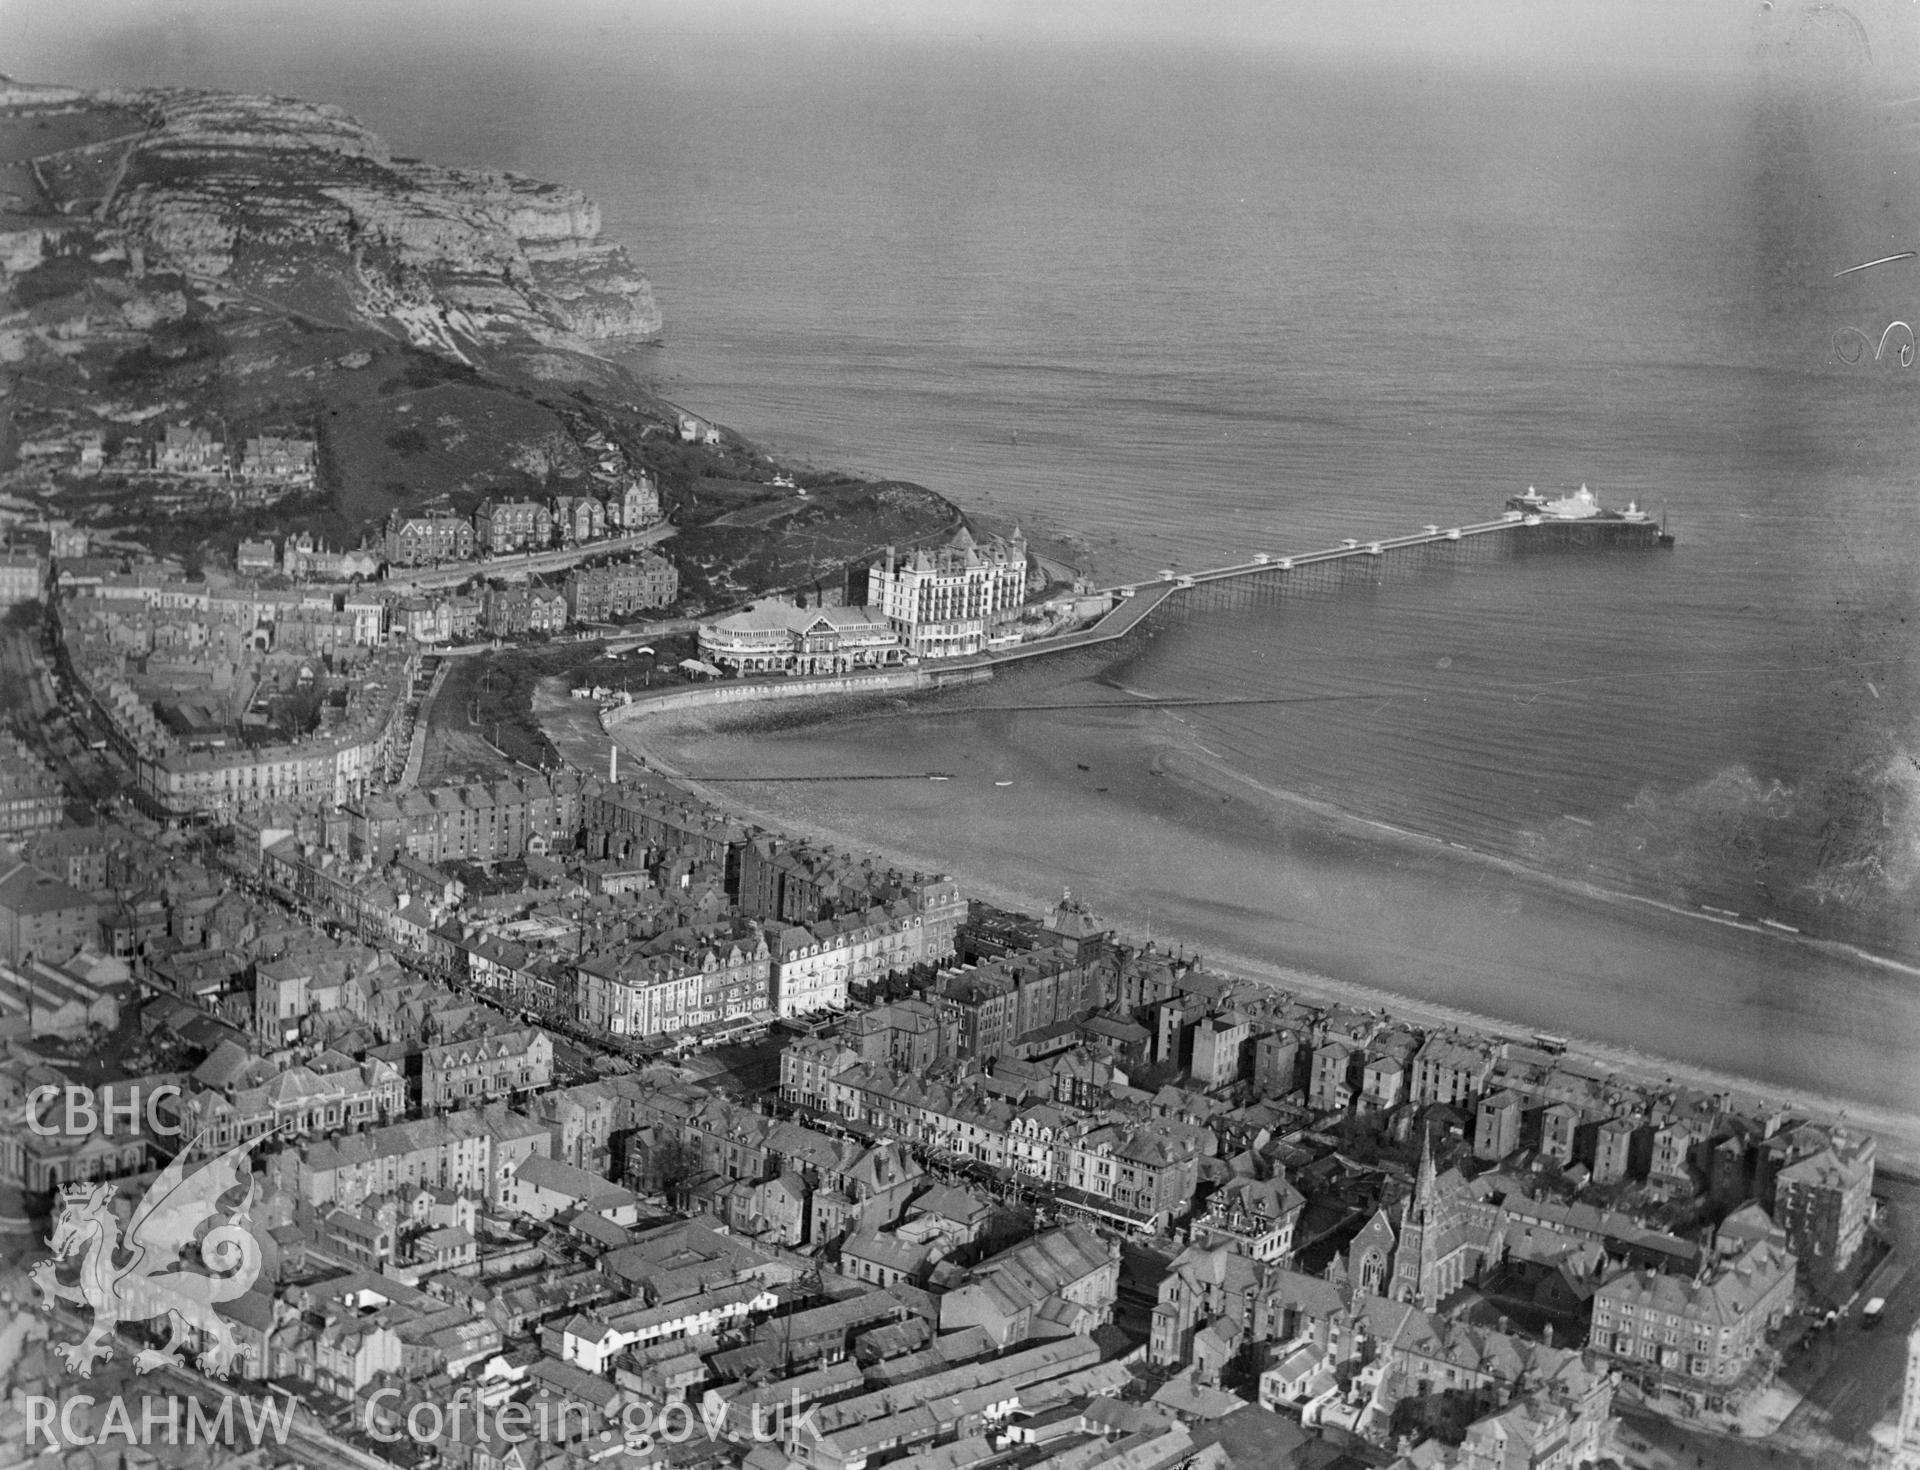 General view of Llandudno showing pier, oblique aerial view. 5?x4? black and white glass plate negative.